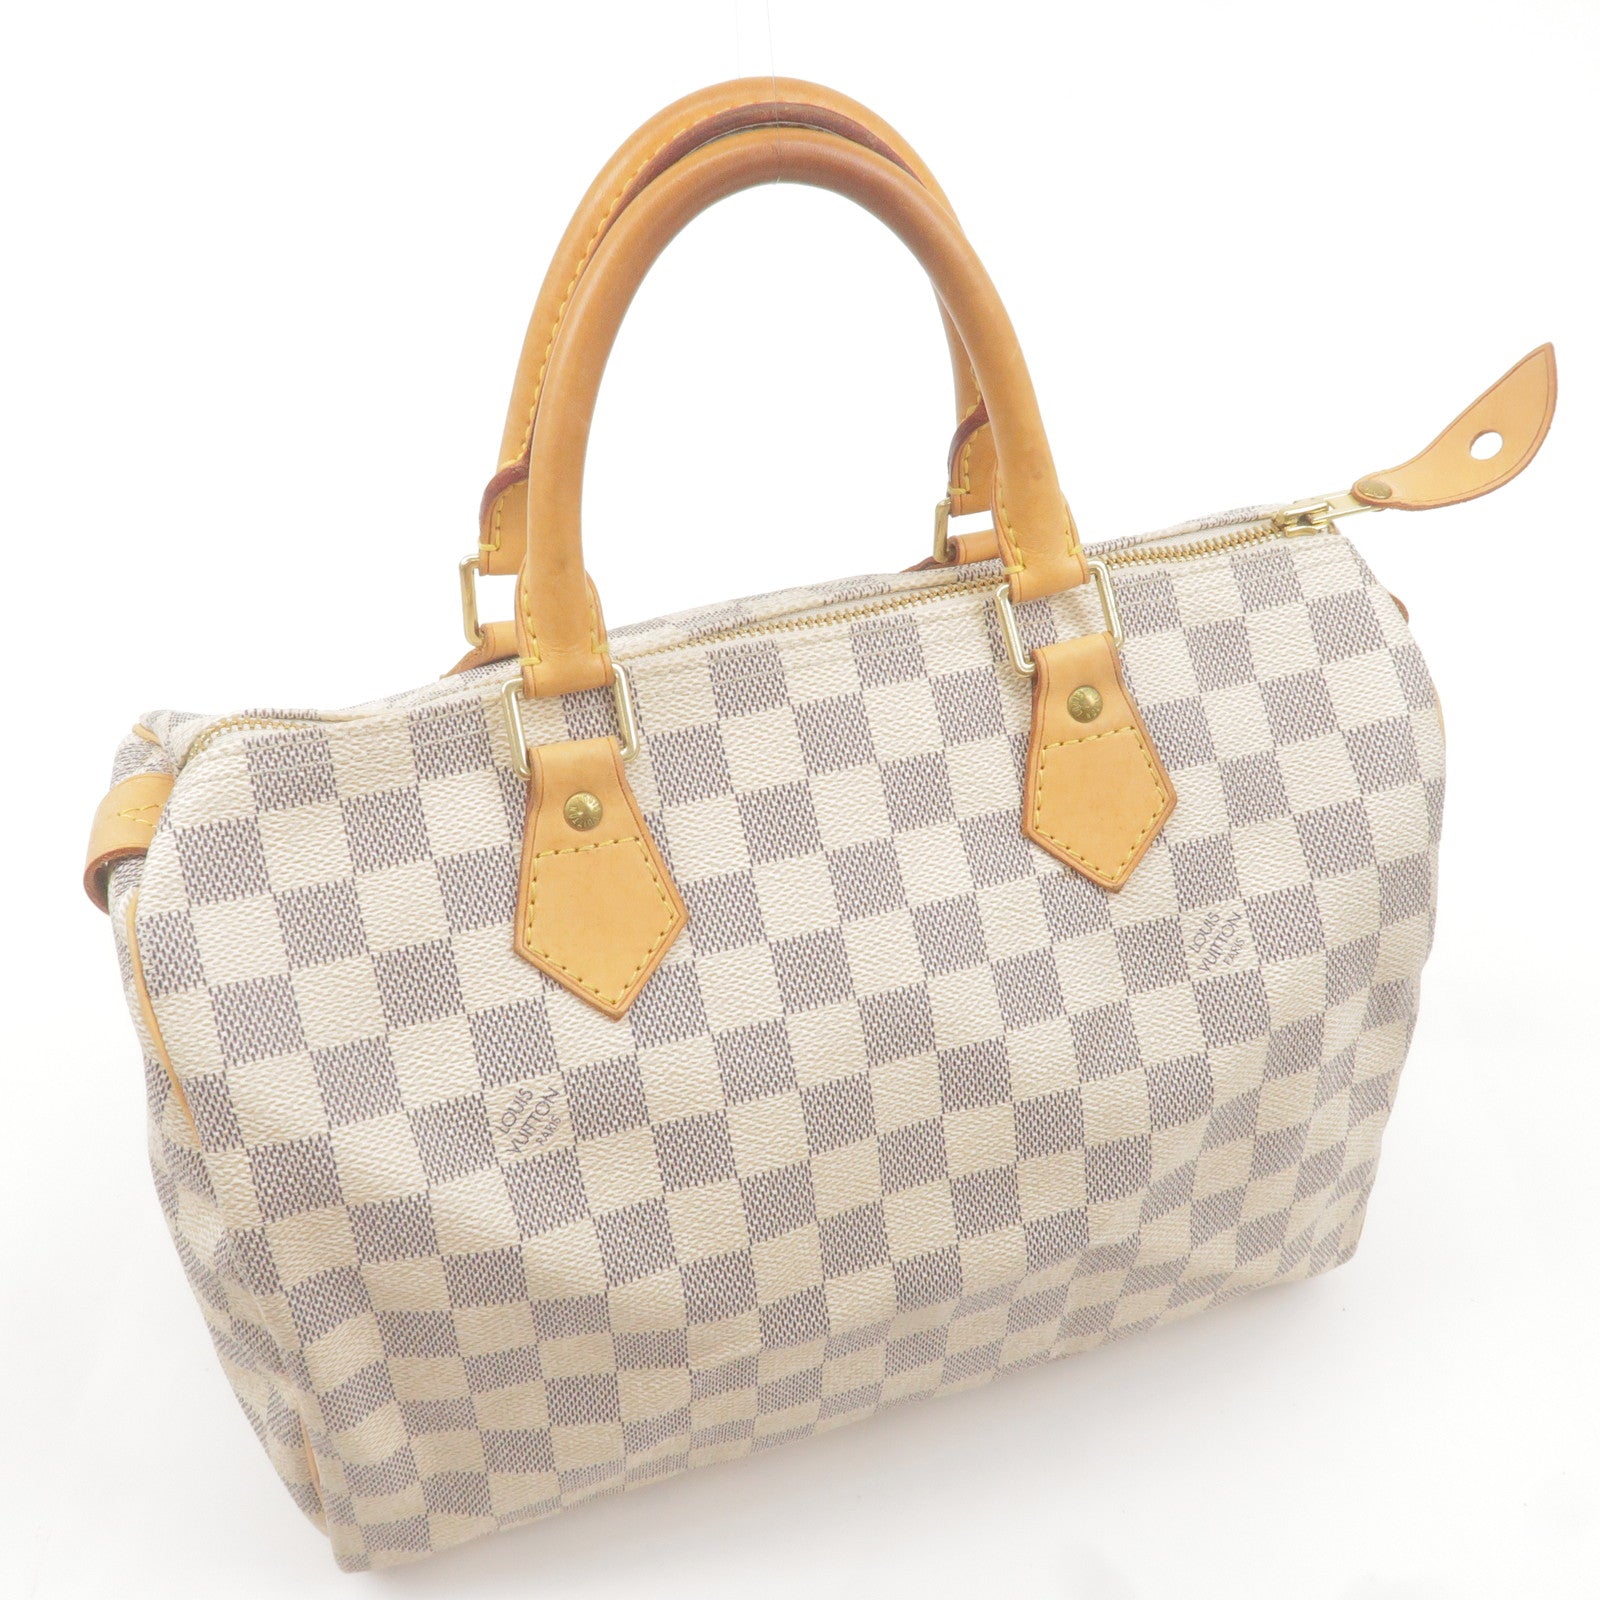 Louis Vuitton 2000 pre-owned Packall PM 3-way Travel Bag - Farfetch